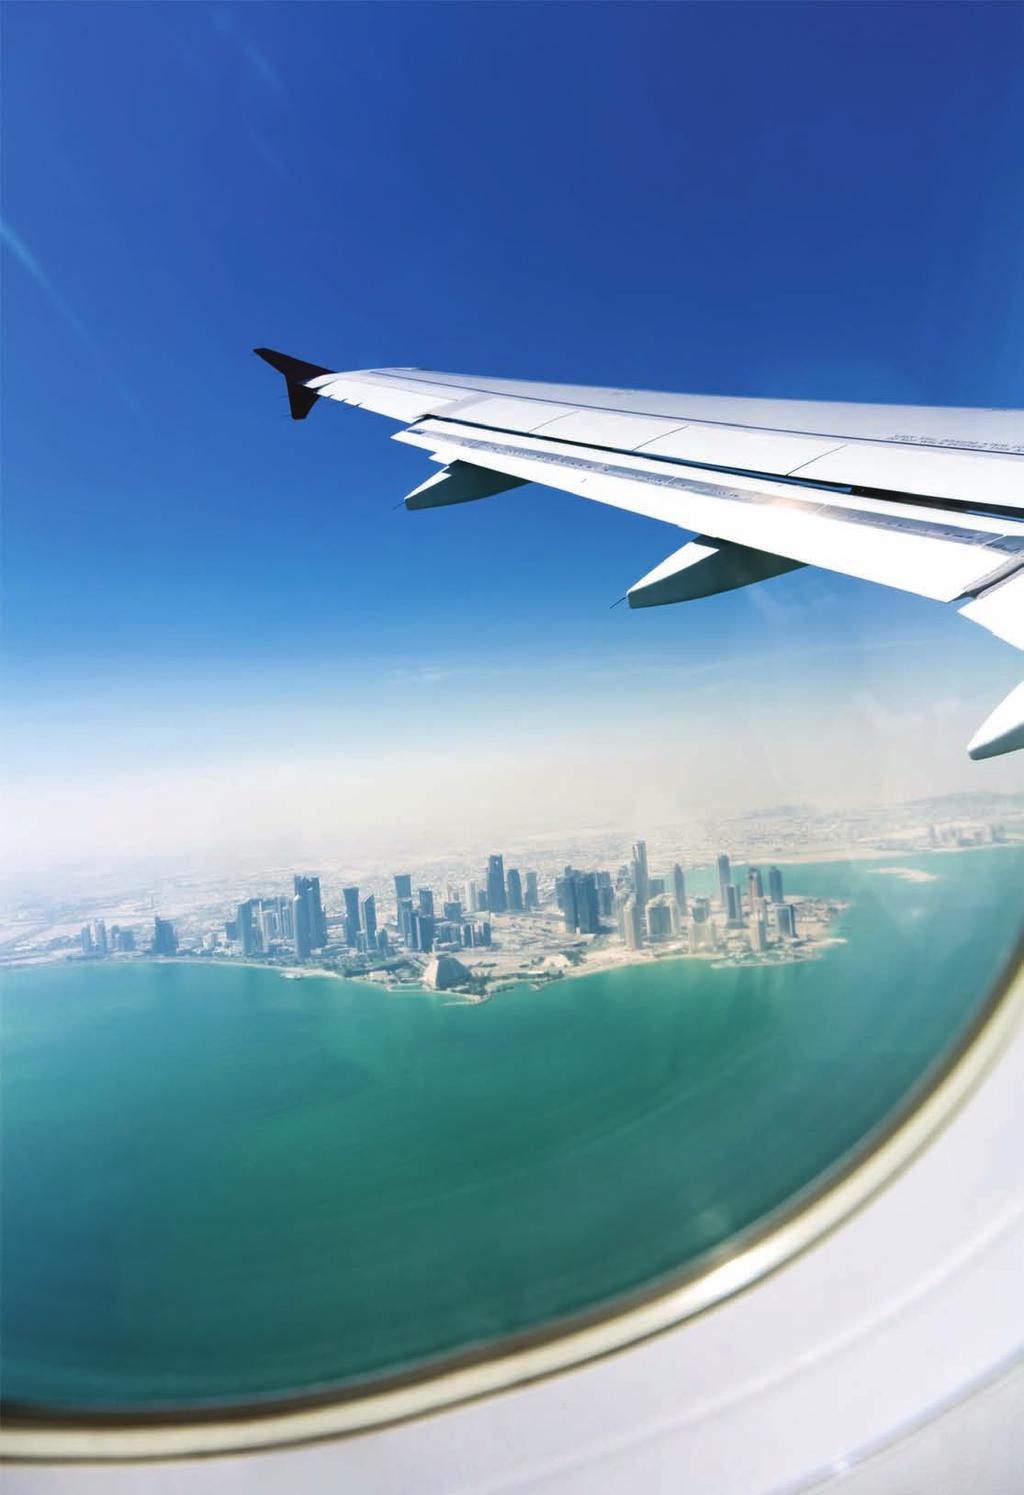 IMAGE DOHA FROM CAPTION THE AIR This The Qatar is the Investment image caption.